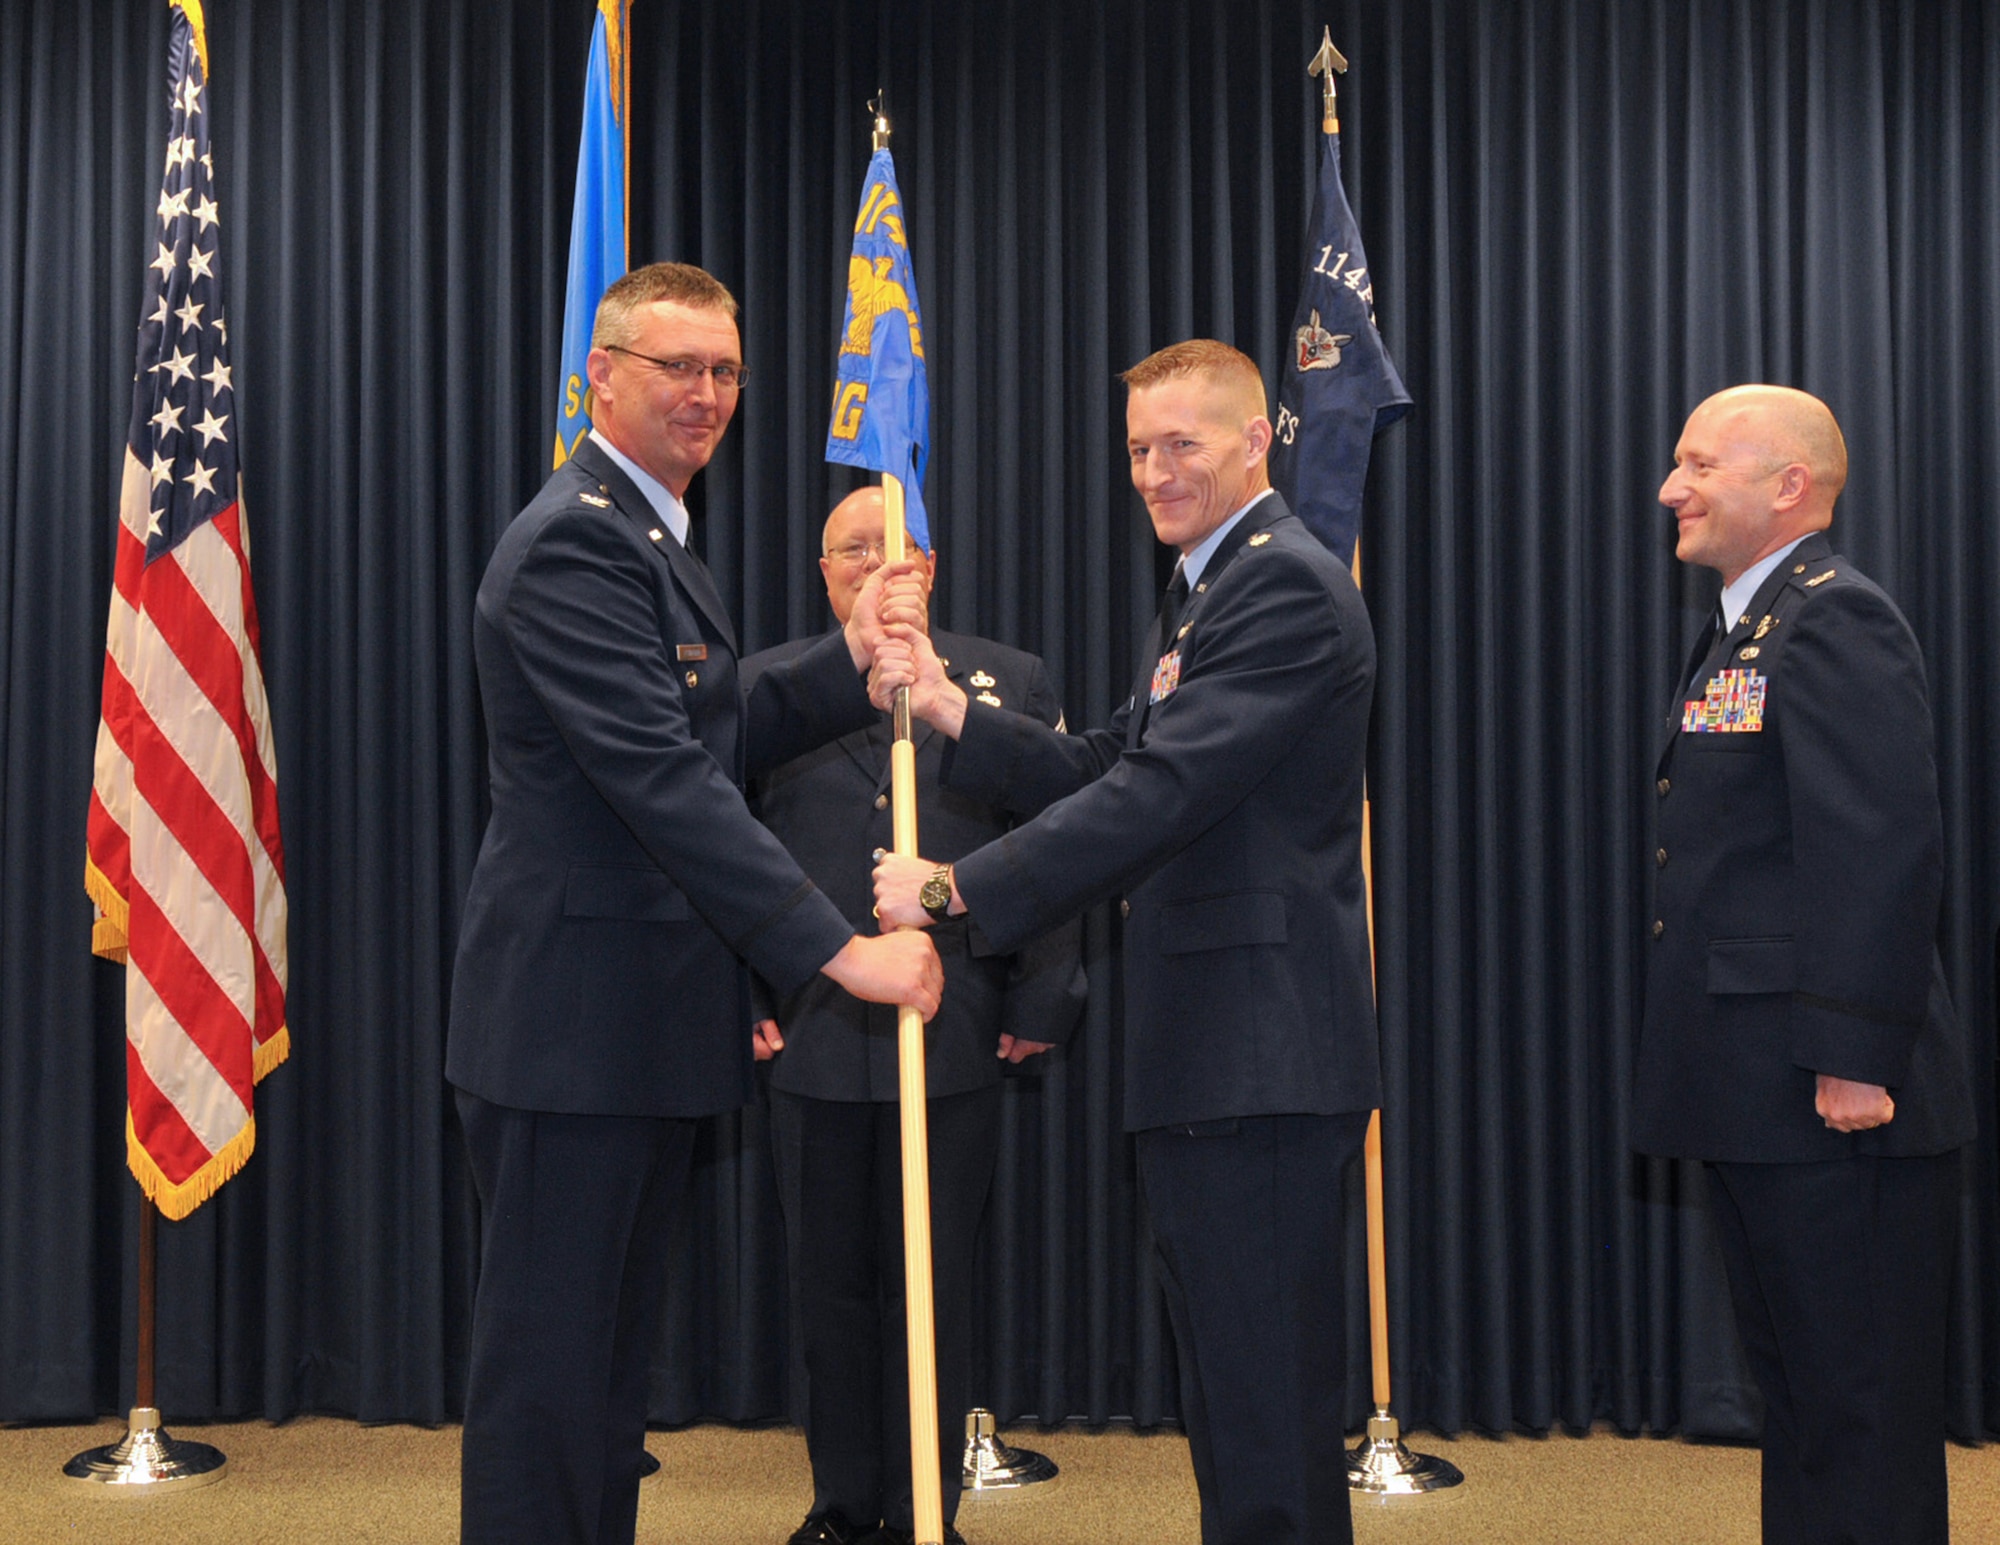 Col. Nate Alholinna, 114th Fighter Wing commander, passes the 114th Operations Group guidon flag to Lt. Col. Quenten Esser as he assumes command of the 114th Operations Group effective May 1, 2016. (U.S. Air National Guard photo by Master Sgt. Christopher Stewart/Released)